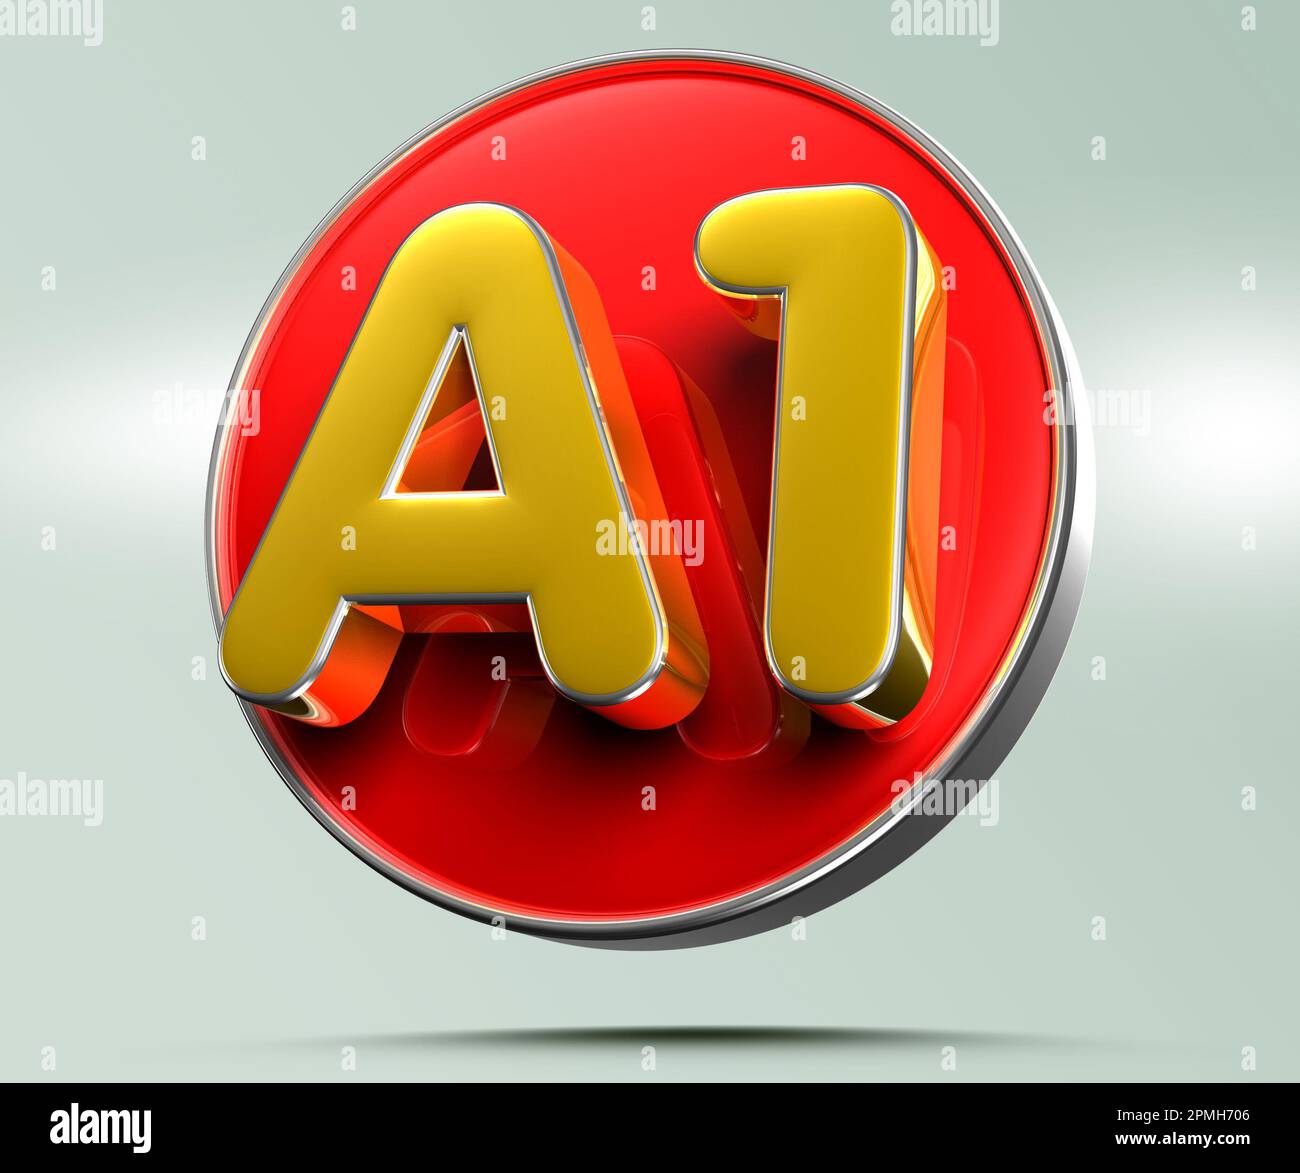 https://c8.alamy.com/comp/2PMH706/a1-gold-on-red-circle-3d-illustration-on-light-gray-background-have-work-path-advertising-signs-product-design-product-sales-product-code-2PMH706.jpg